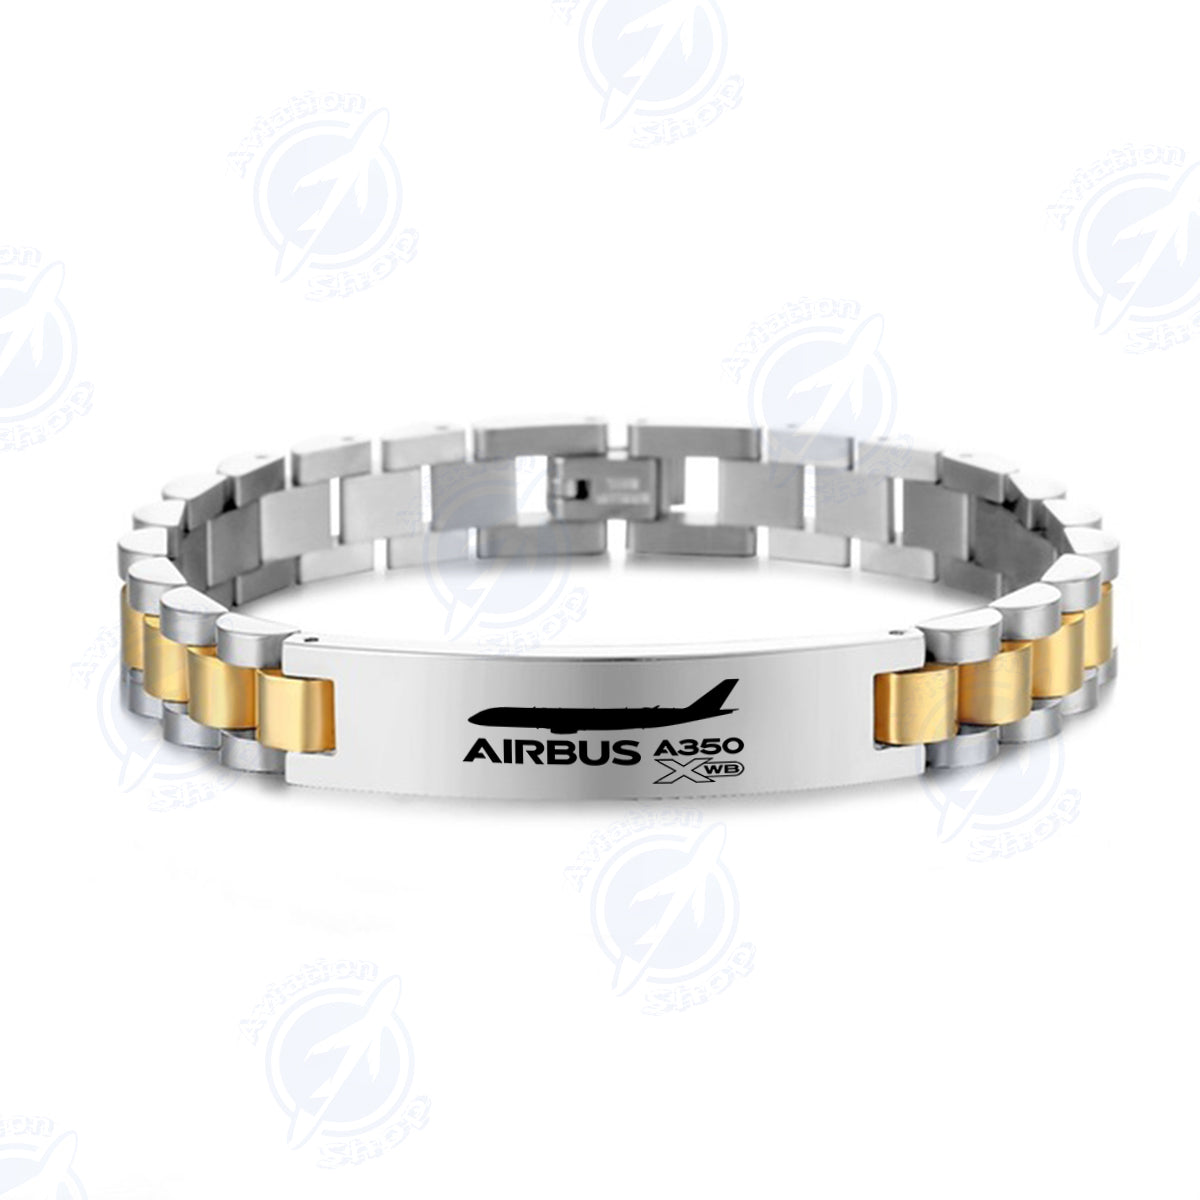 The Airbus A350 WXB Designed Stainless Steel Chain Bracelets